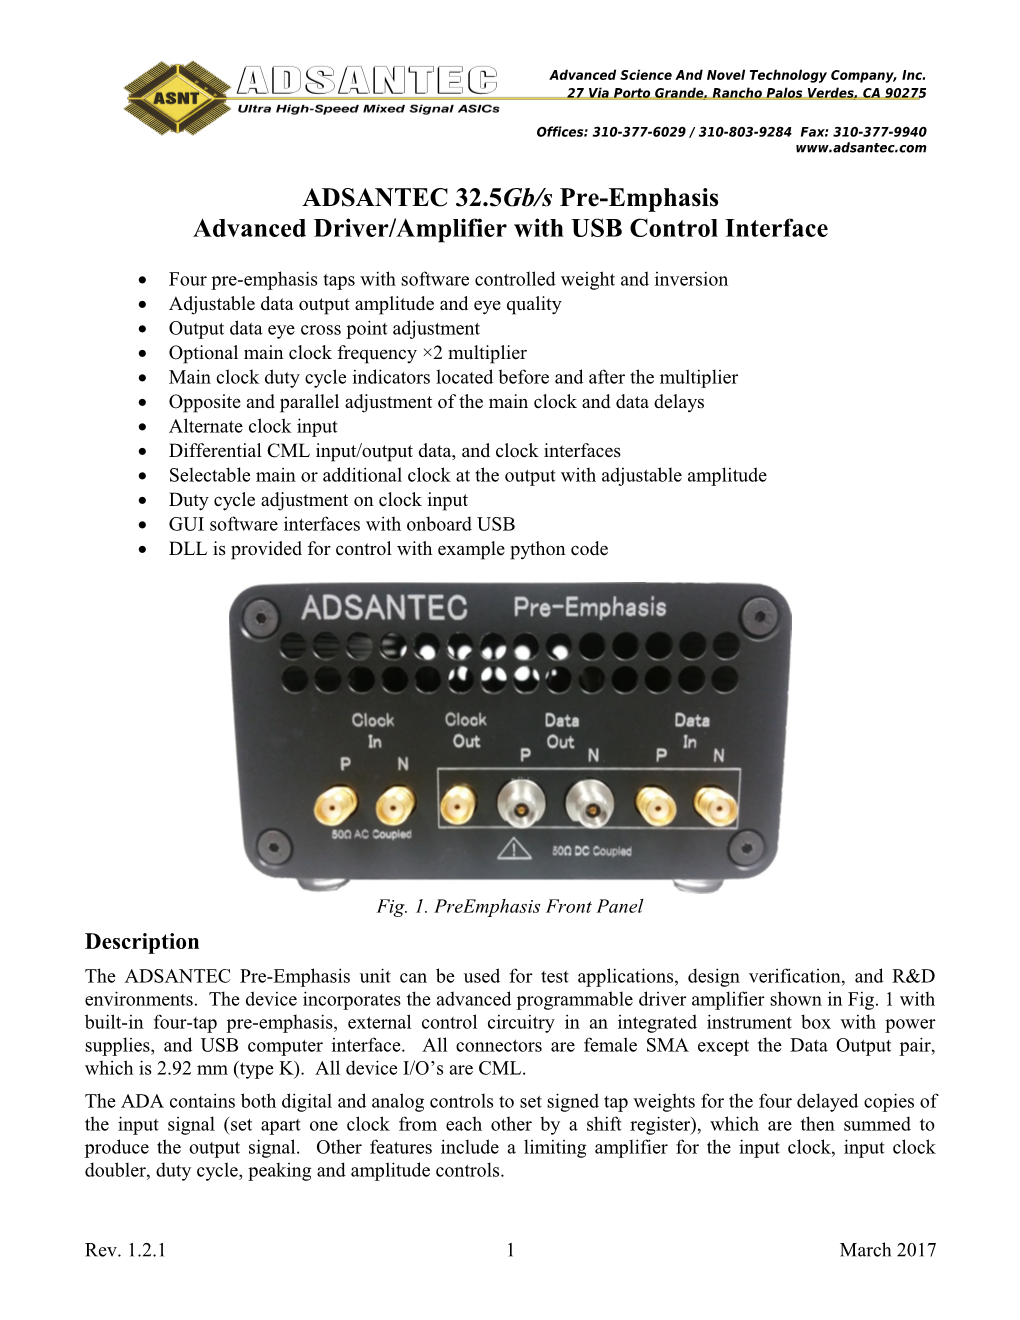 Advanced Driver/Amplifierwith USB Control Interface